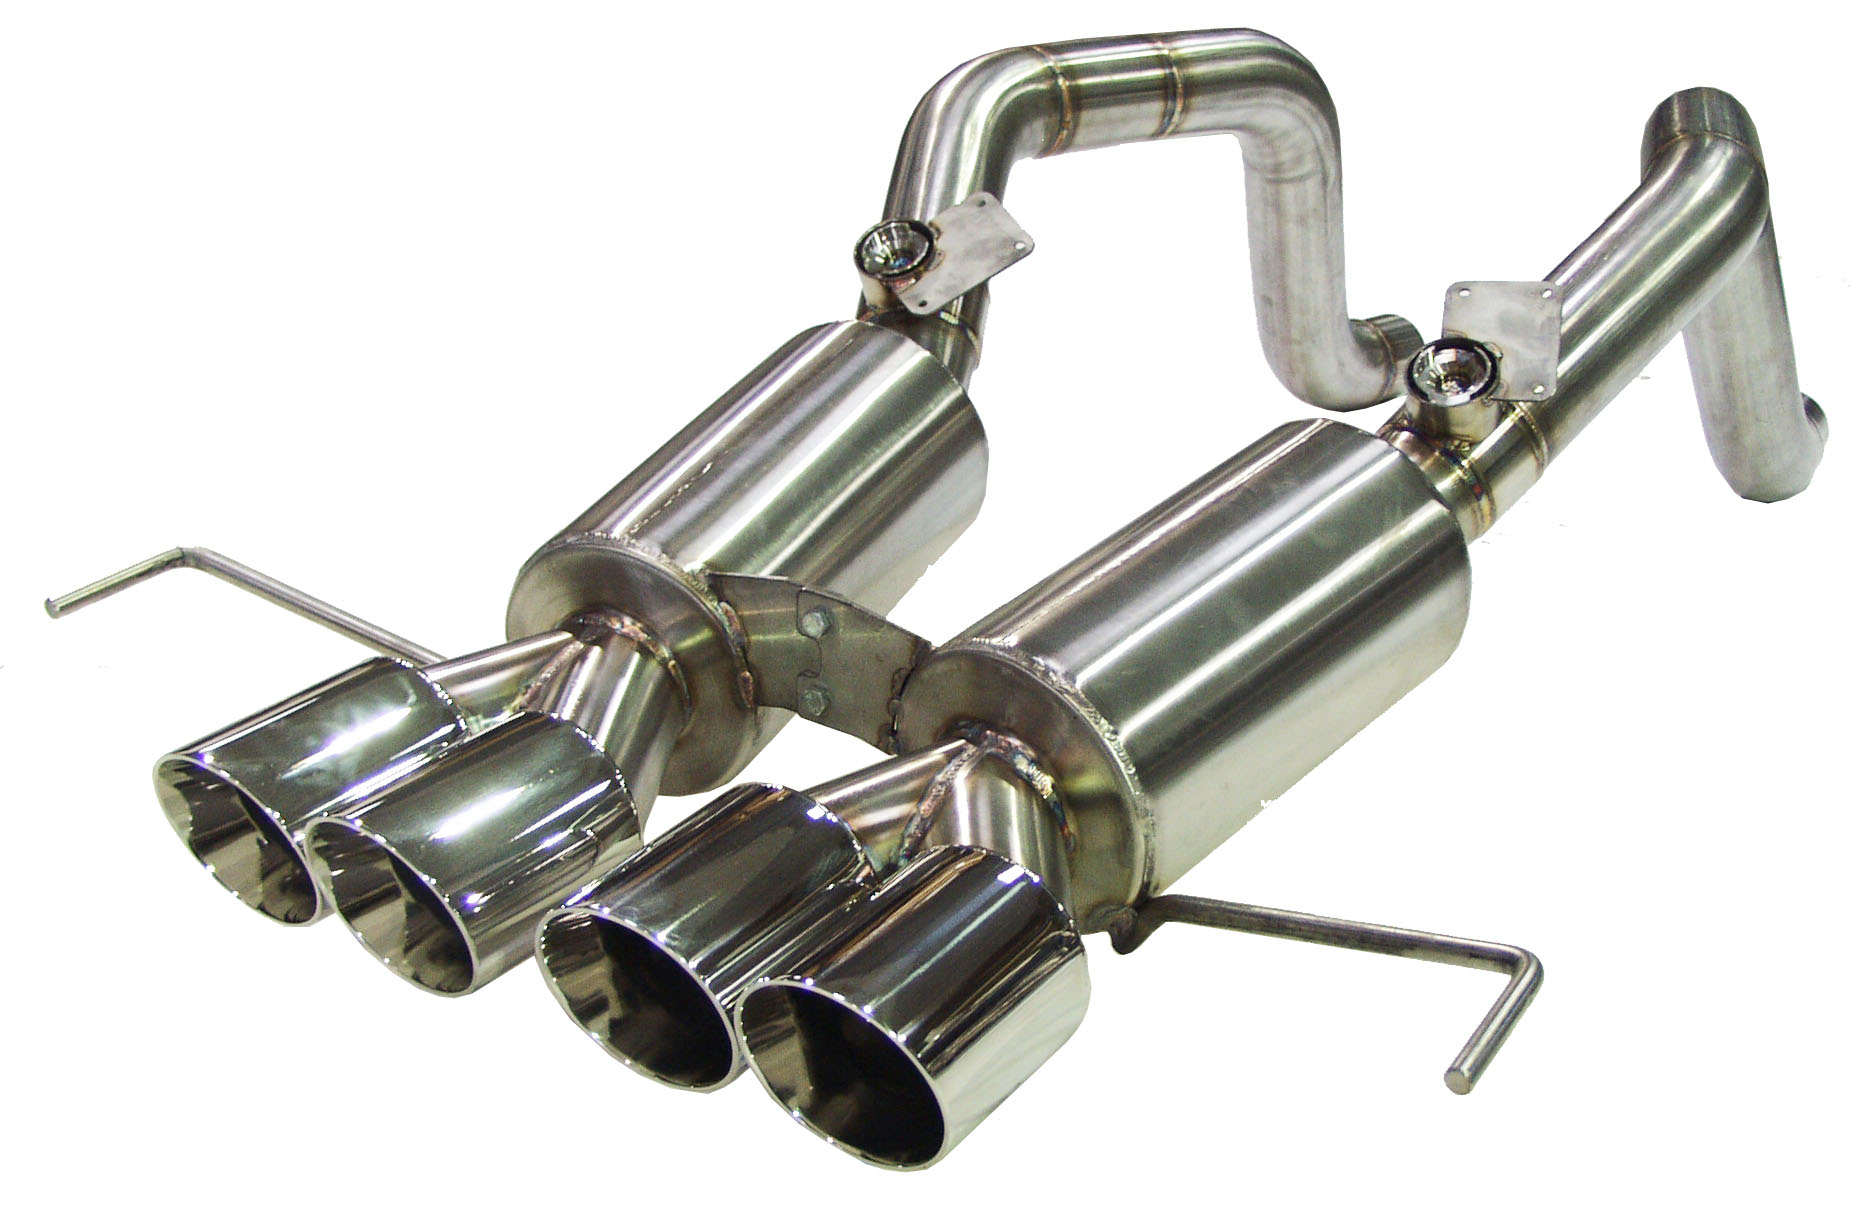 B&B 2014 + C7 Corvette Bullet Exhaust System, QUAD 4.5" DOUBLE WALL OVAL TIPS